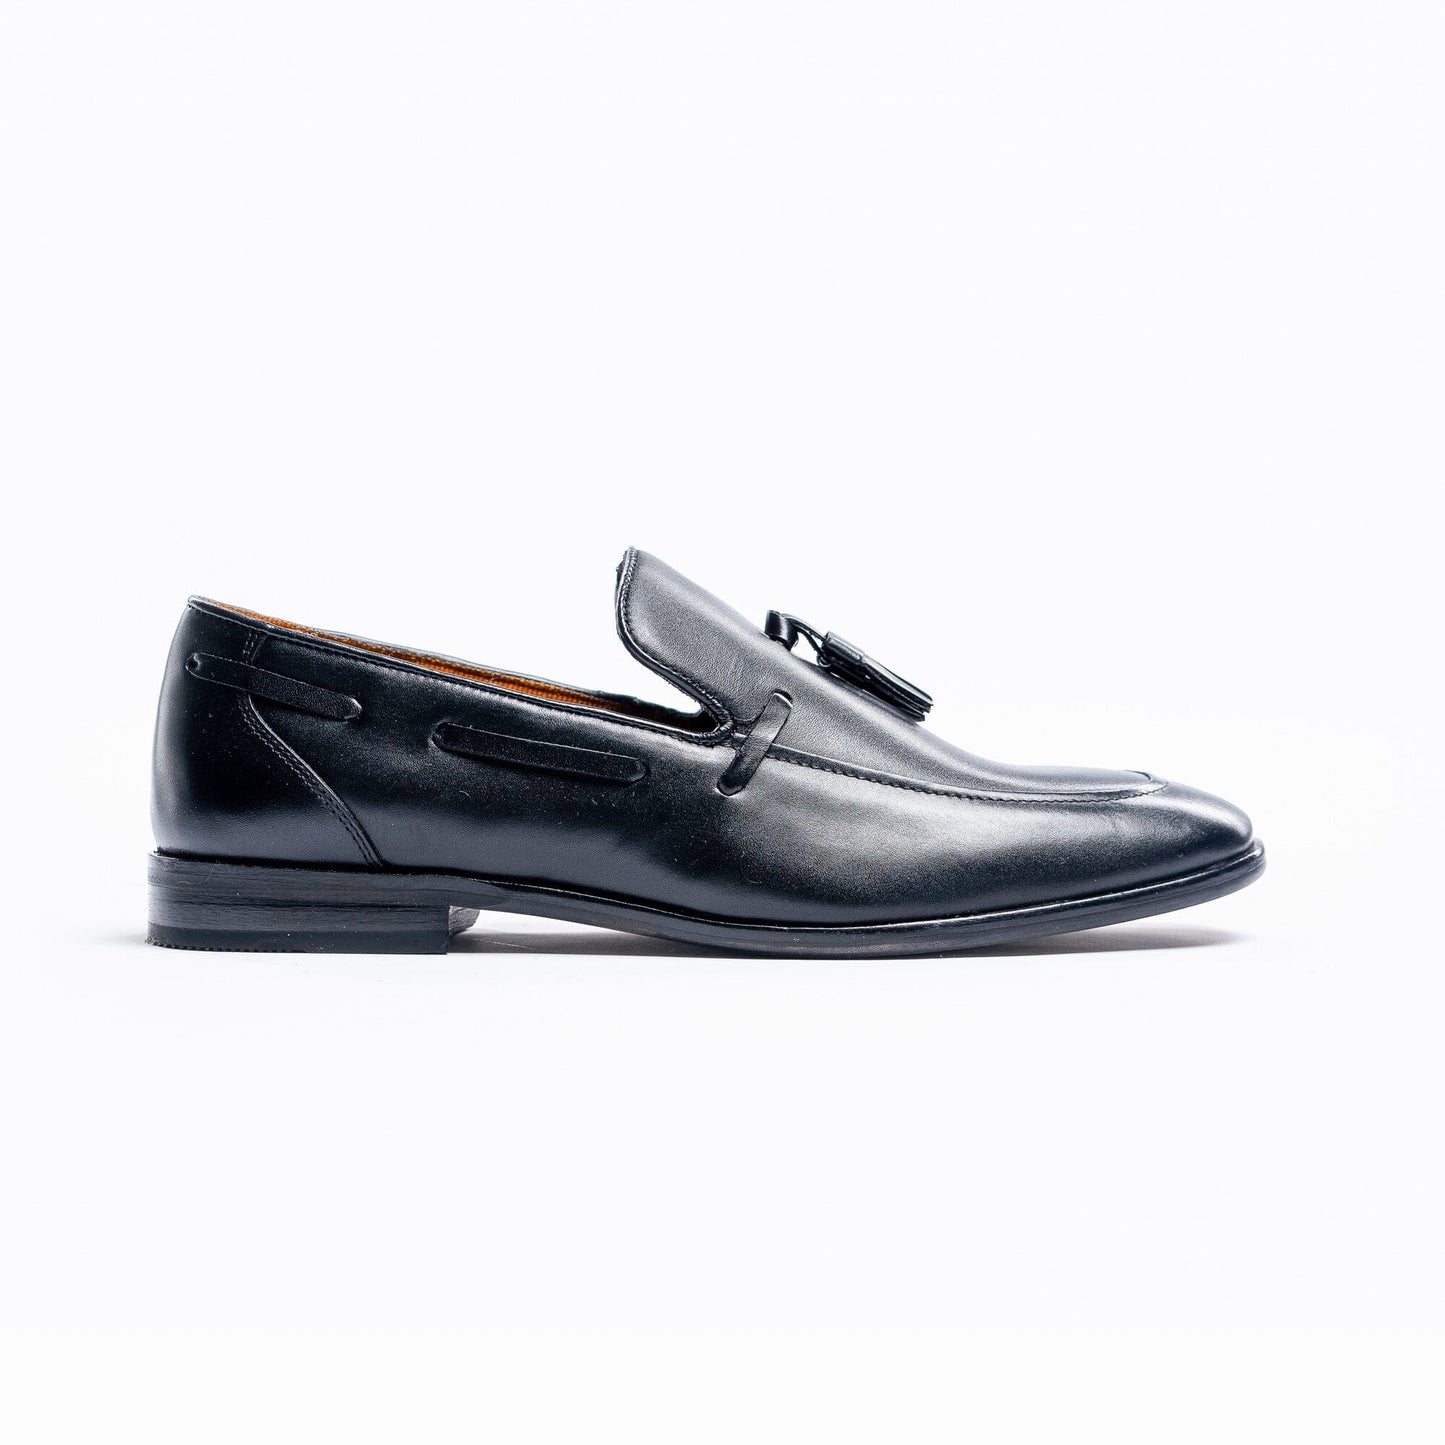 Freemont Tassel Black Leather Loafers - Shoes - 7 - THREADPEPPER